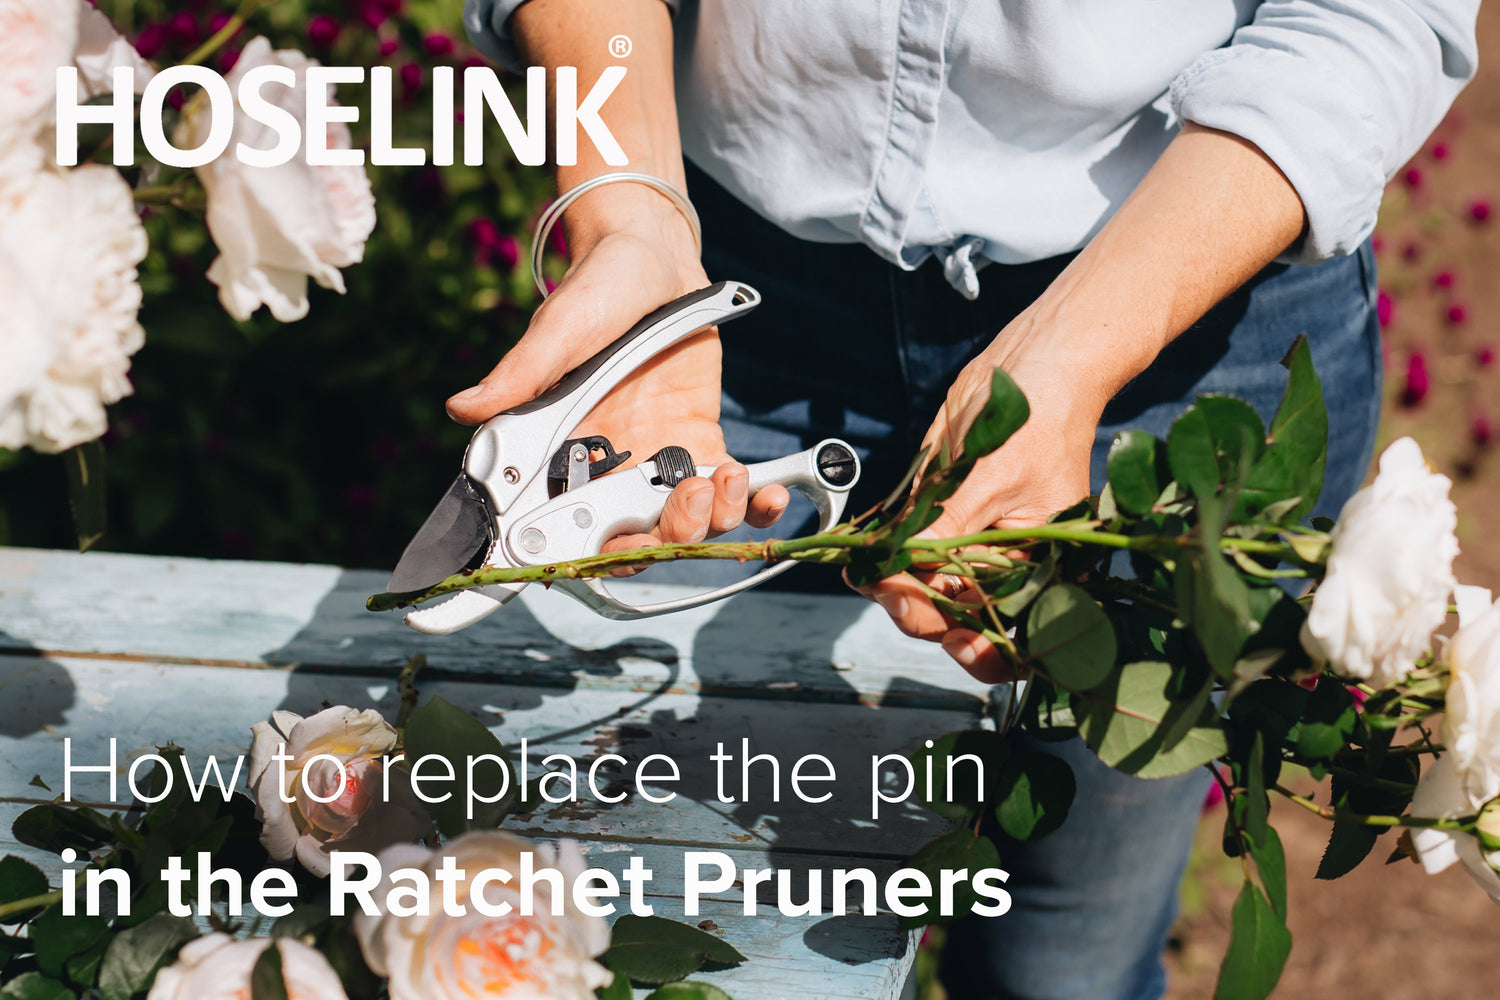 How to replace the pin in Hoselink's Ratchet Pruners